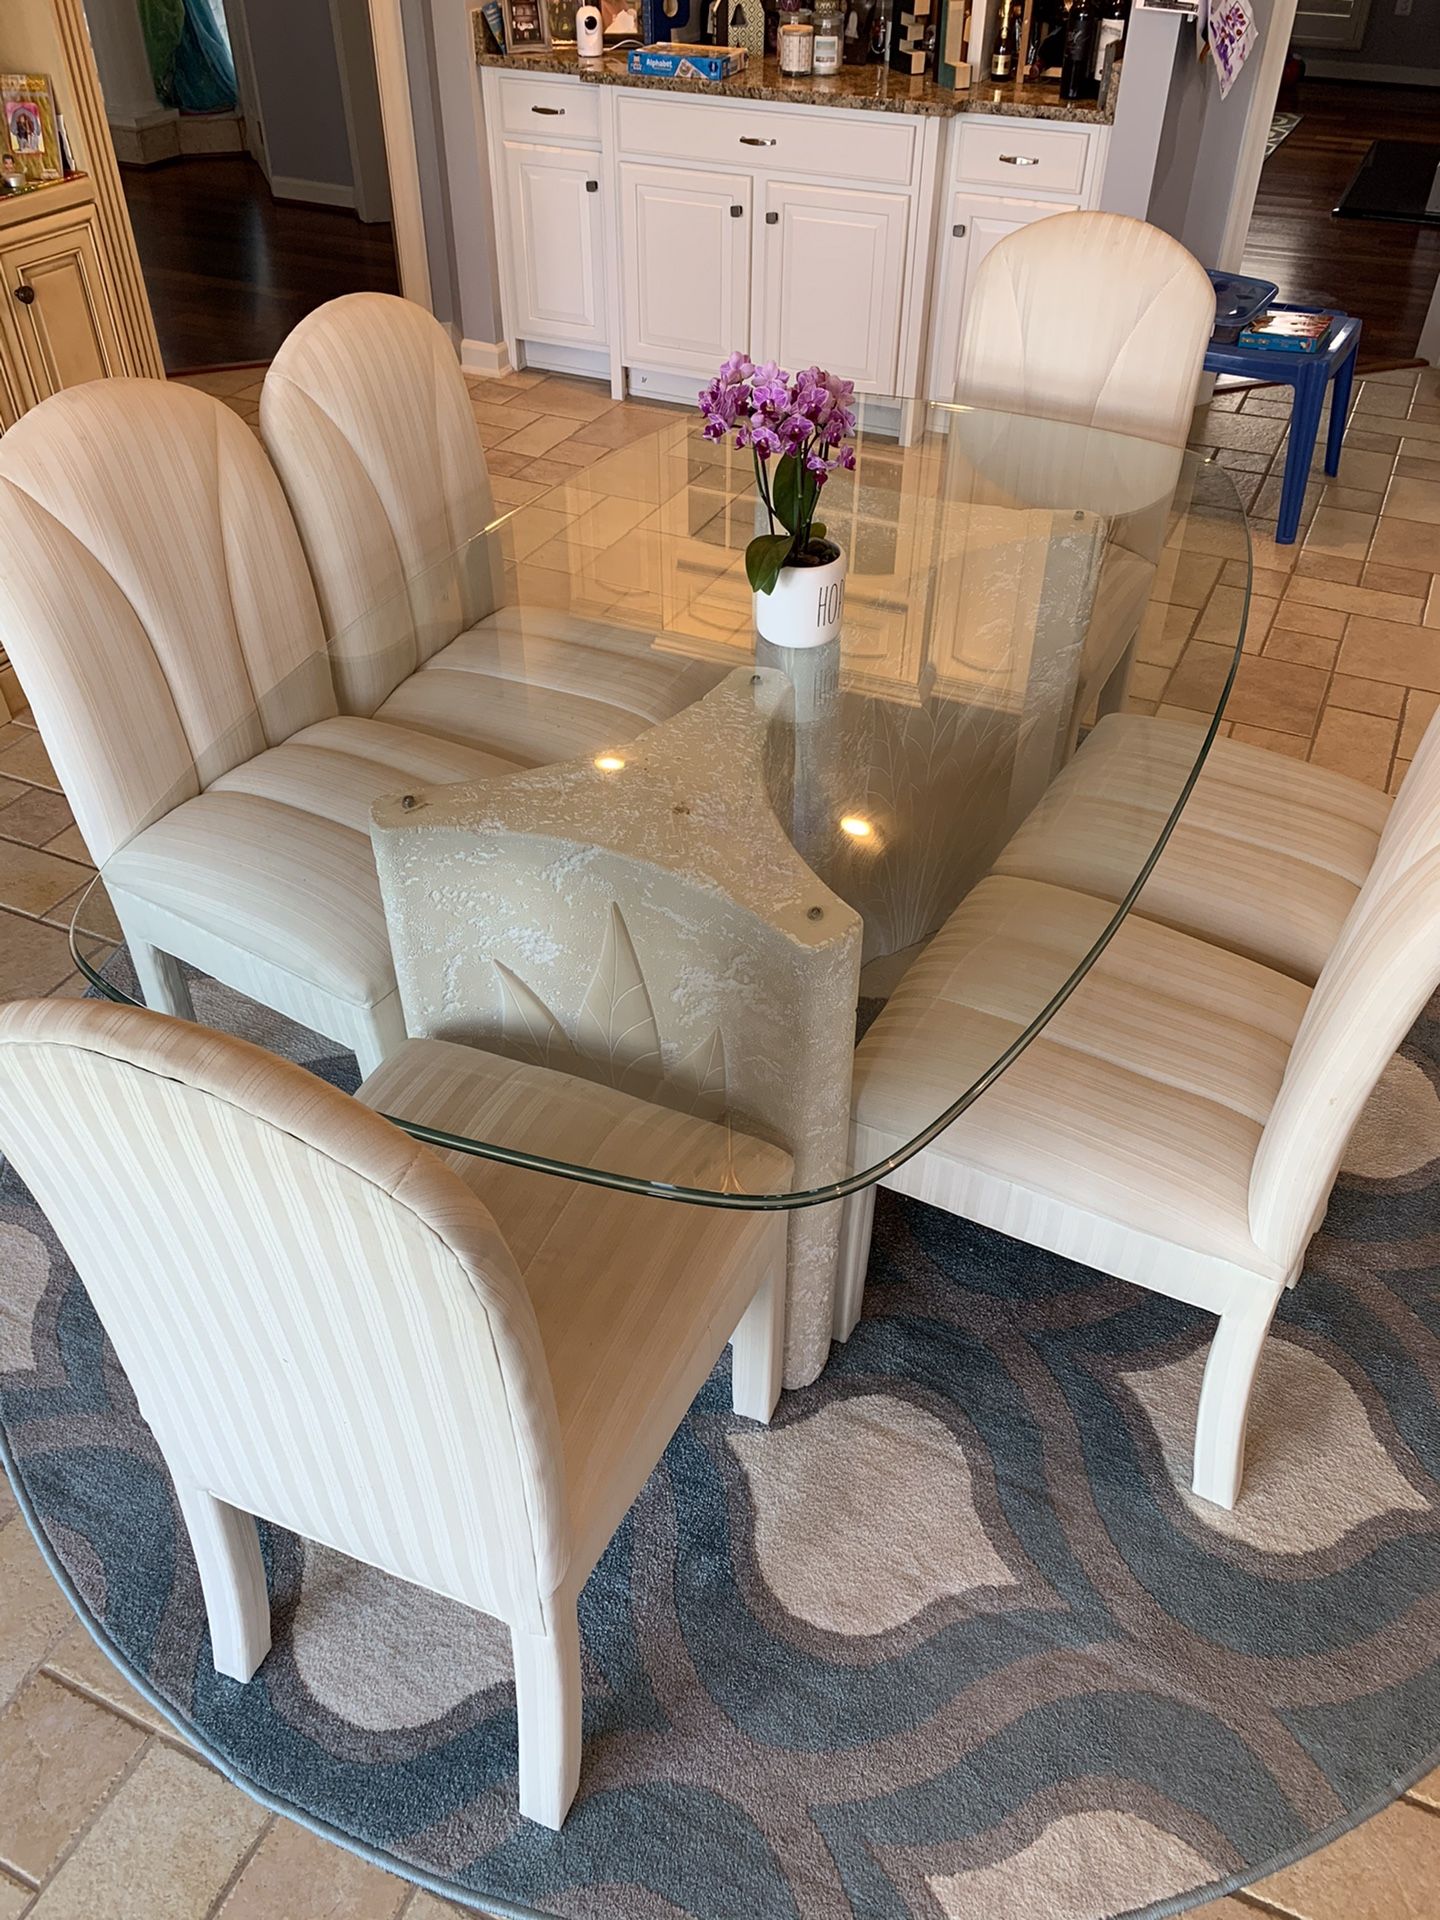 Contemporary glass table with six chairs